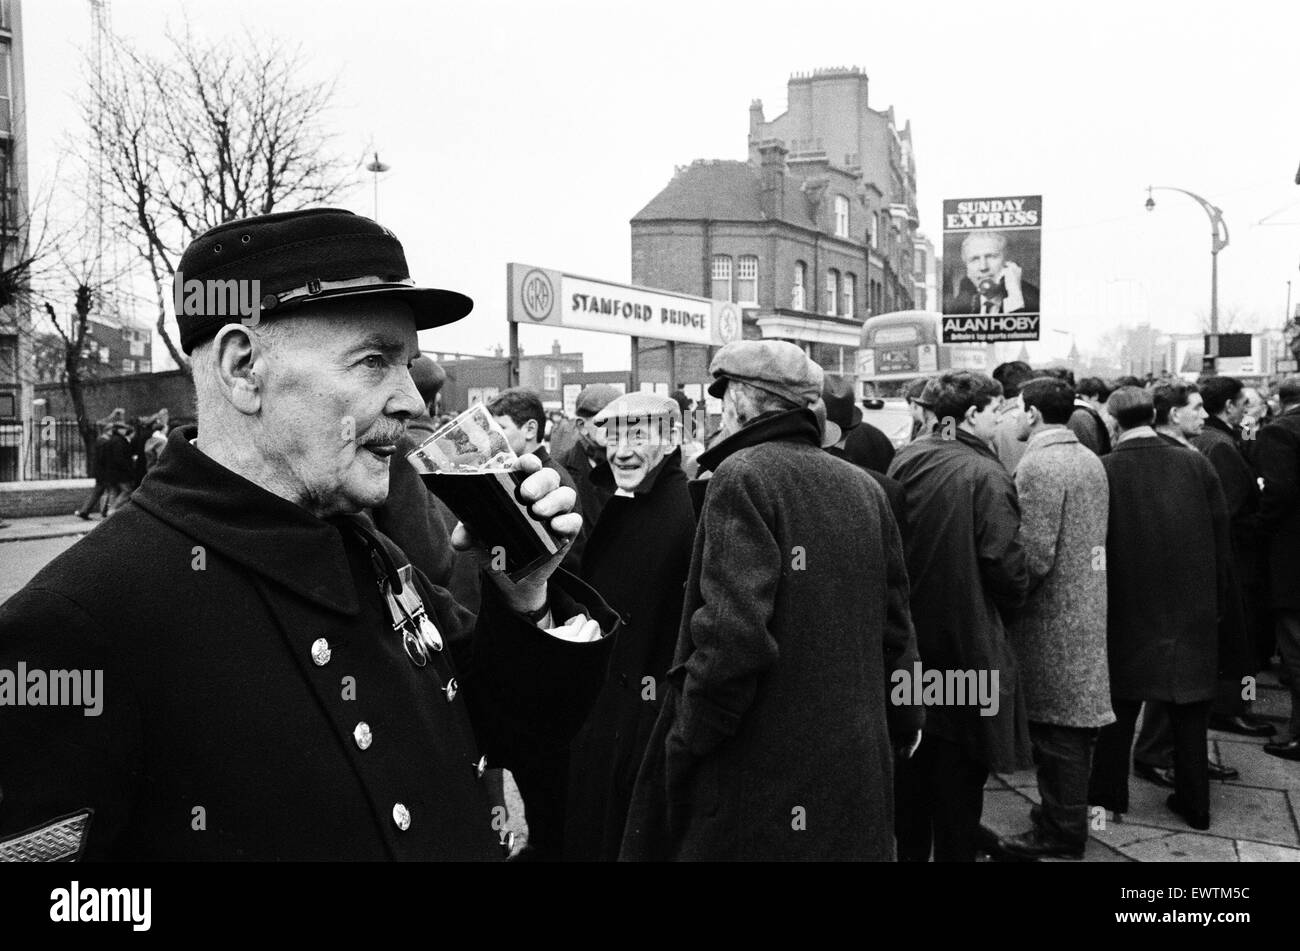 Scenes outside Stamford Bridge stadium on the day of a match between Chelsea v Tottenham Hotspur, FA Cup 5th round. 83 year old George Smith a Colour Sergeant Chelsea Pensioner having a pint before the match. 20th February 1965. Stock Photo